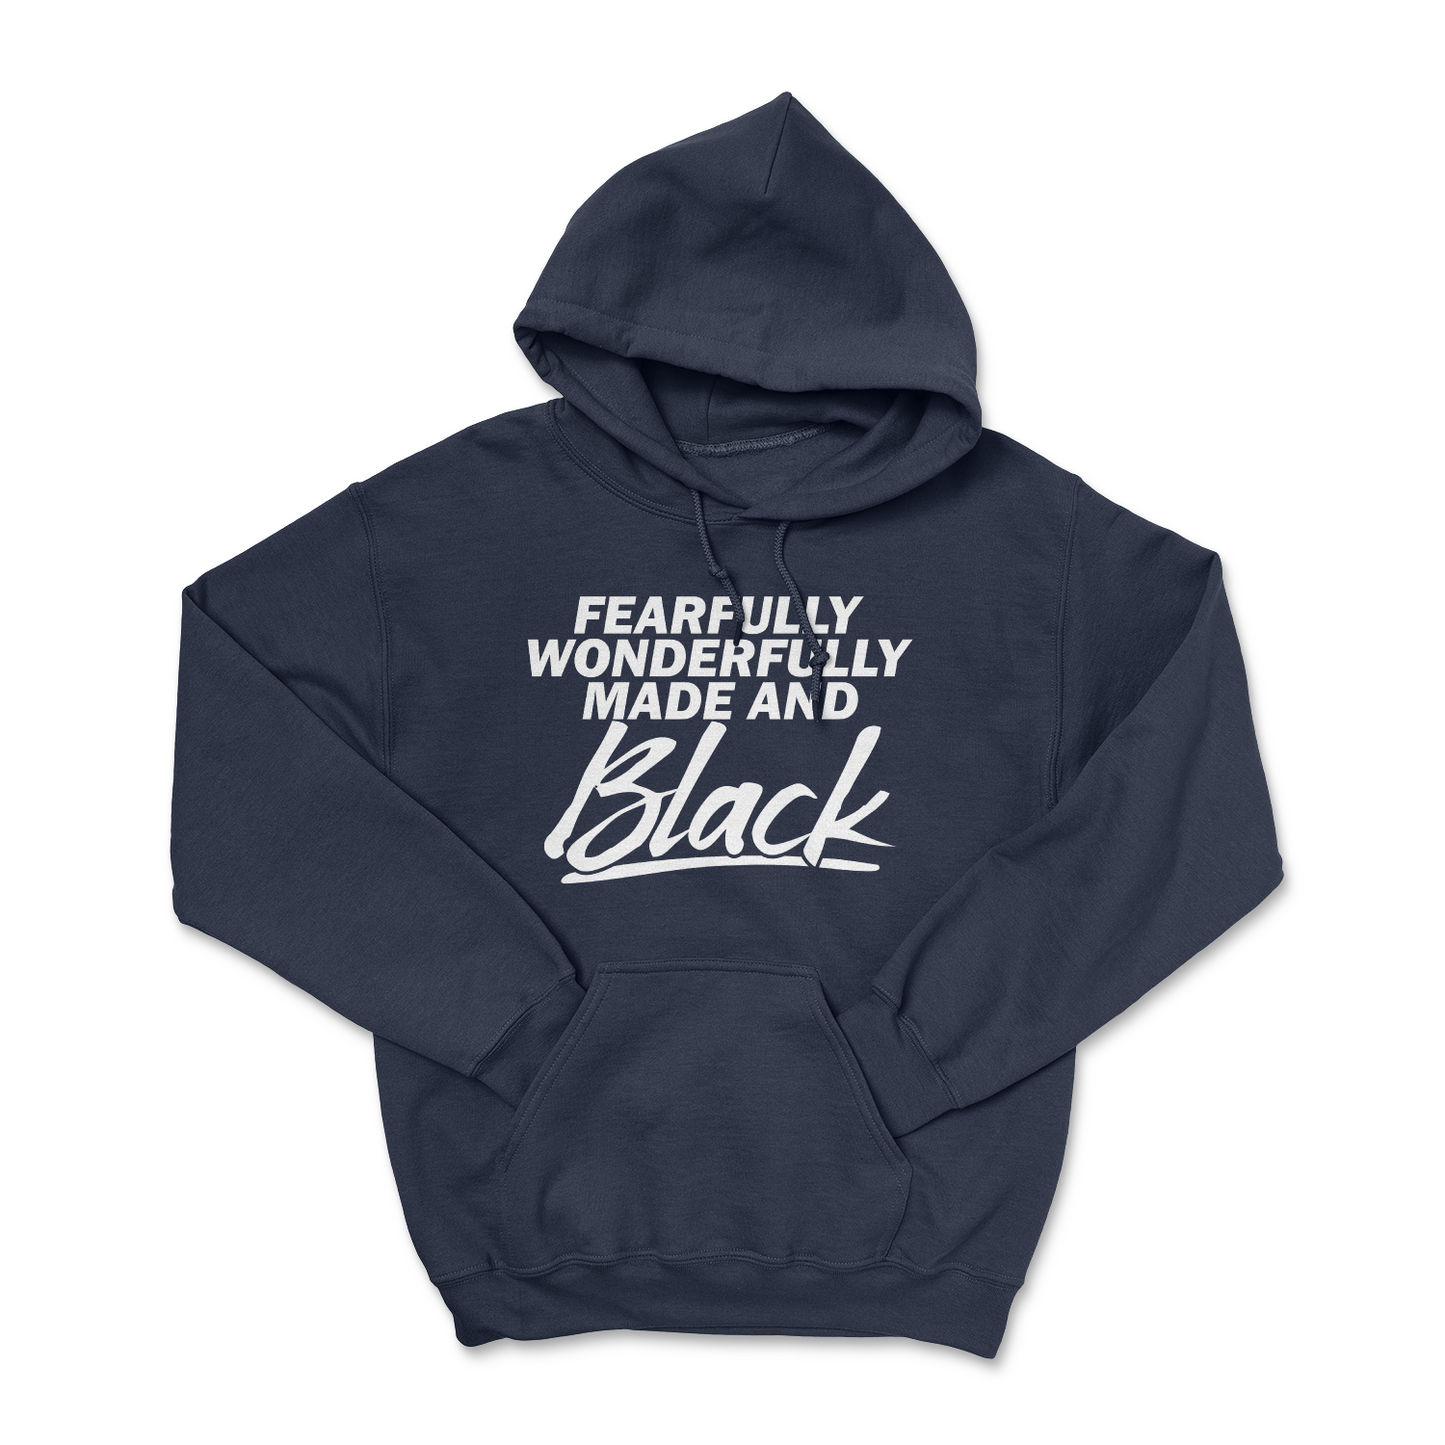 Fearfully Wonderfully Made and Black